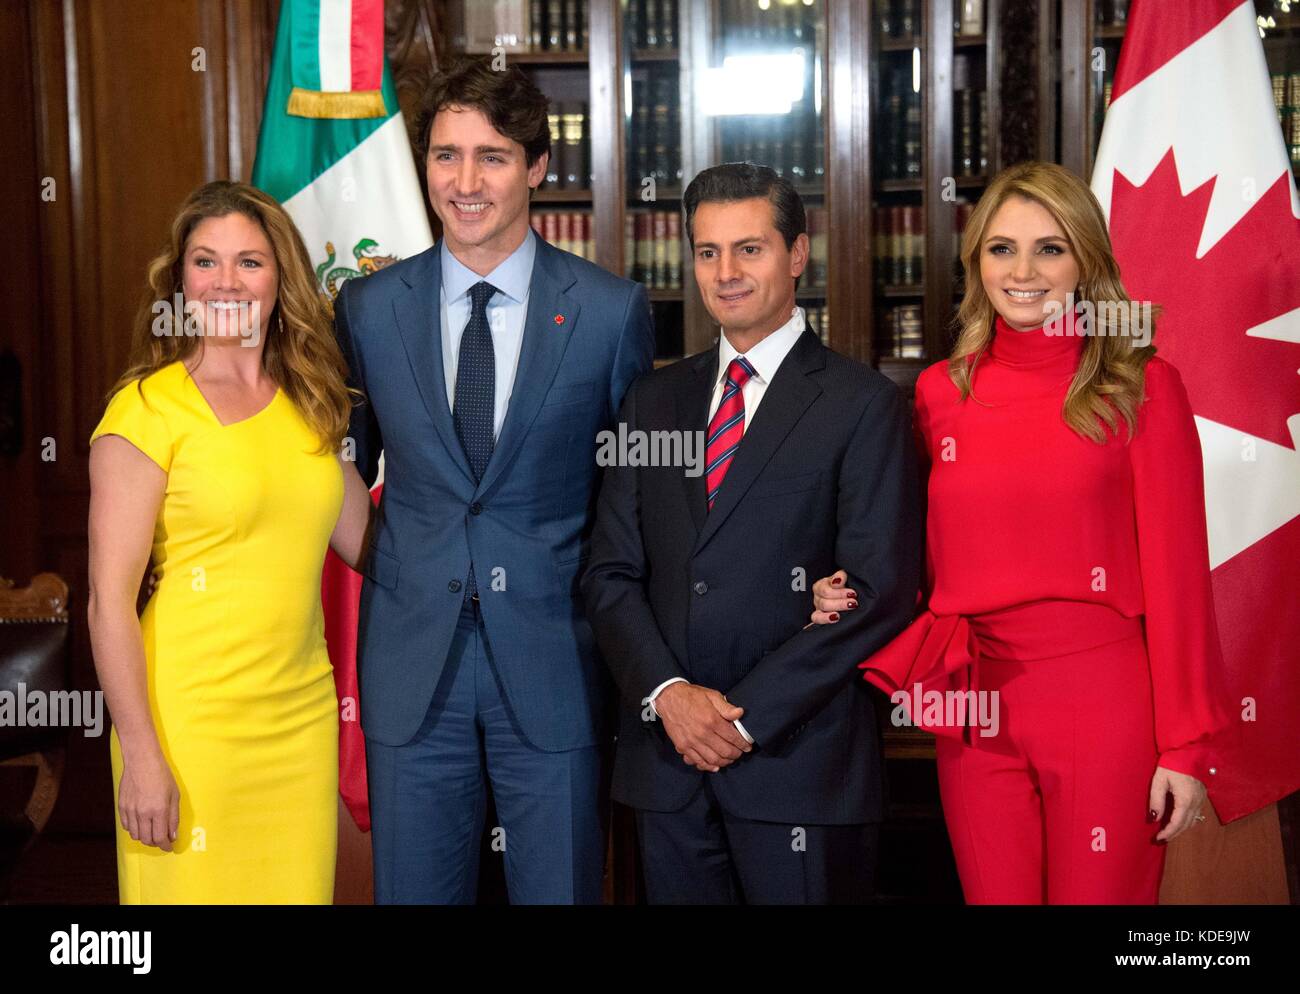 Canadian Prime Minister Justin Trudeau and his wife Sophie Gregoire Trudeau, left, are welcomed by Mexican President Enrique Pena Nieto, and his wife Angelica Rivera during the arrival ceremony at the Palacio Nacional October 12, 2017 in Mexico City, Mexico.   (presidenciamx via Planetpix) Stock Photo